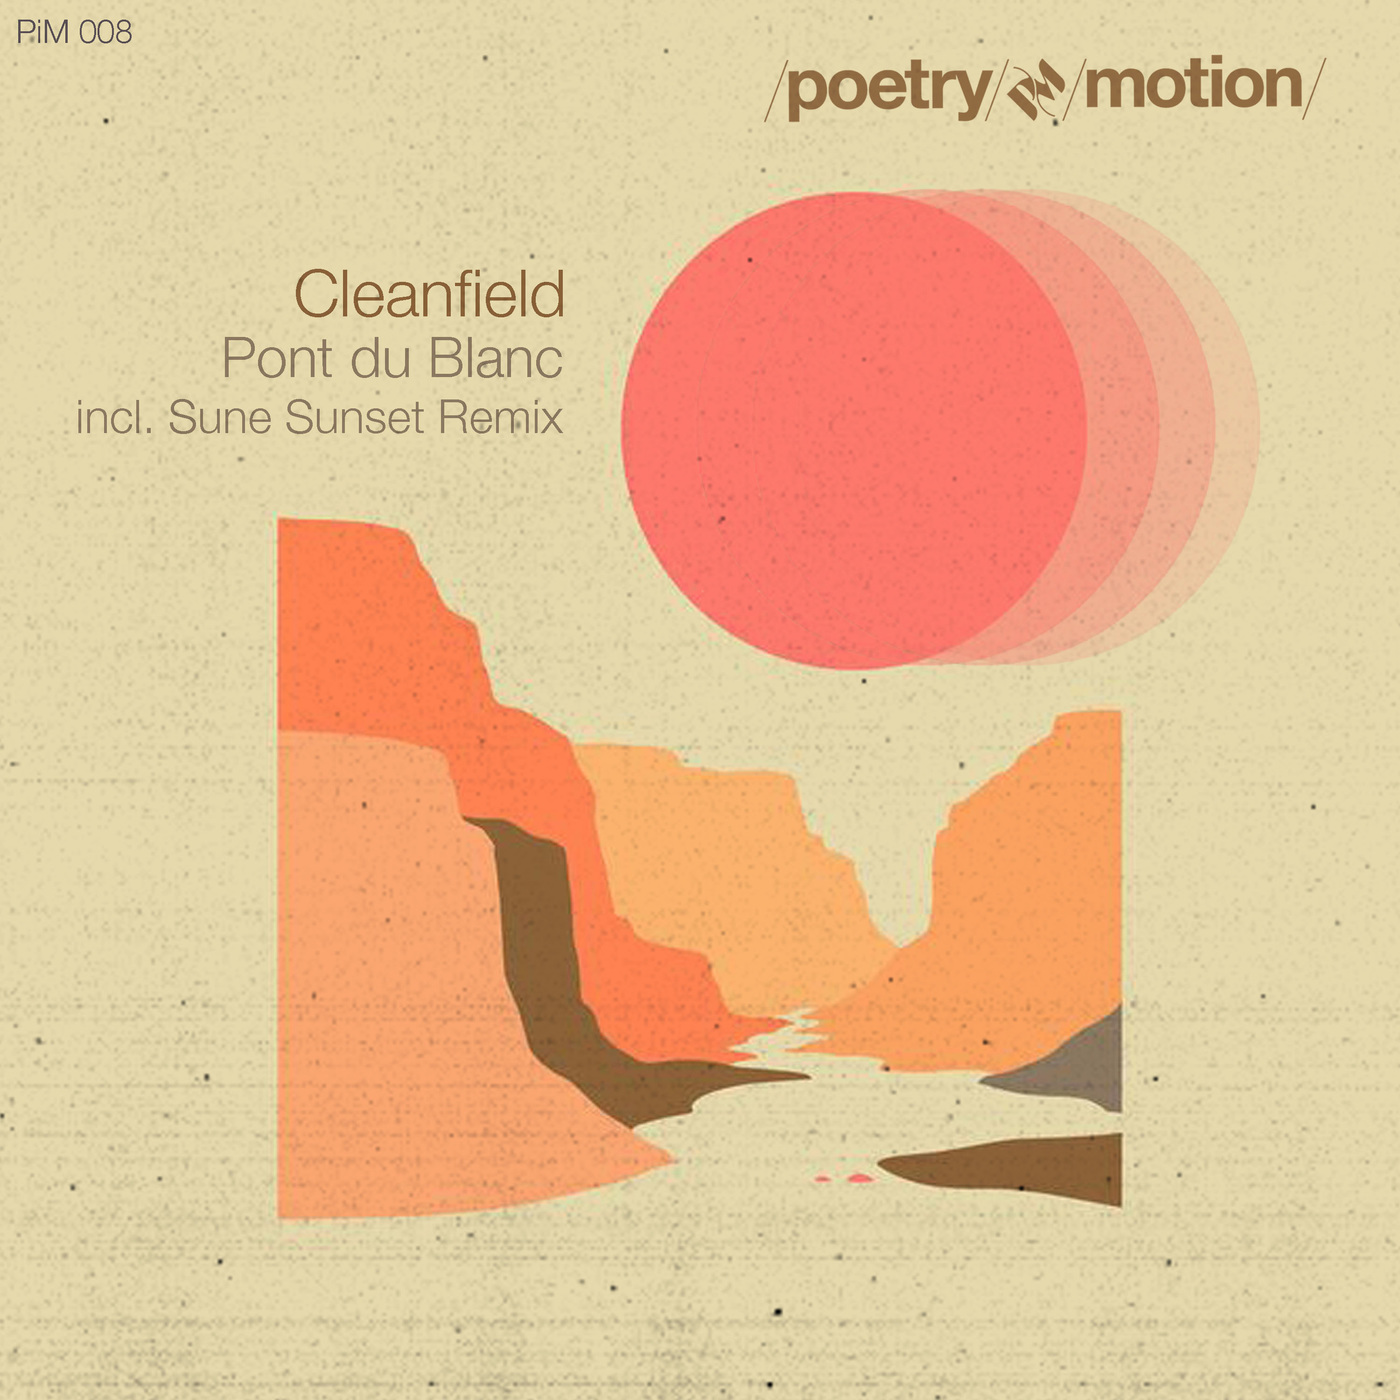 Cleanfield - Pont du Blanc / Poetry in Motion